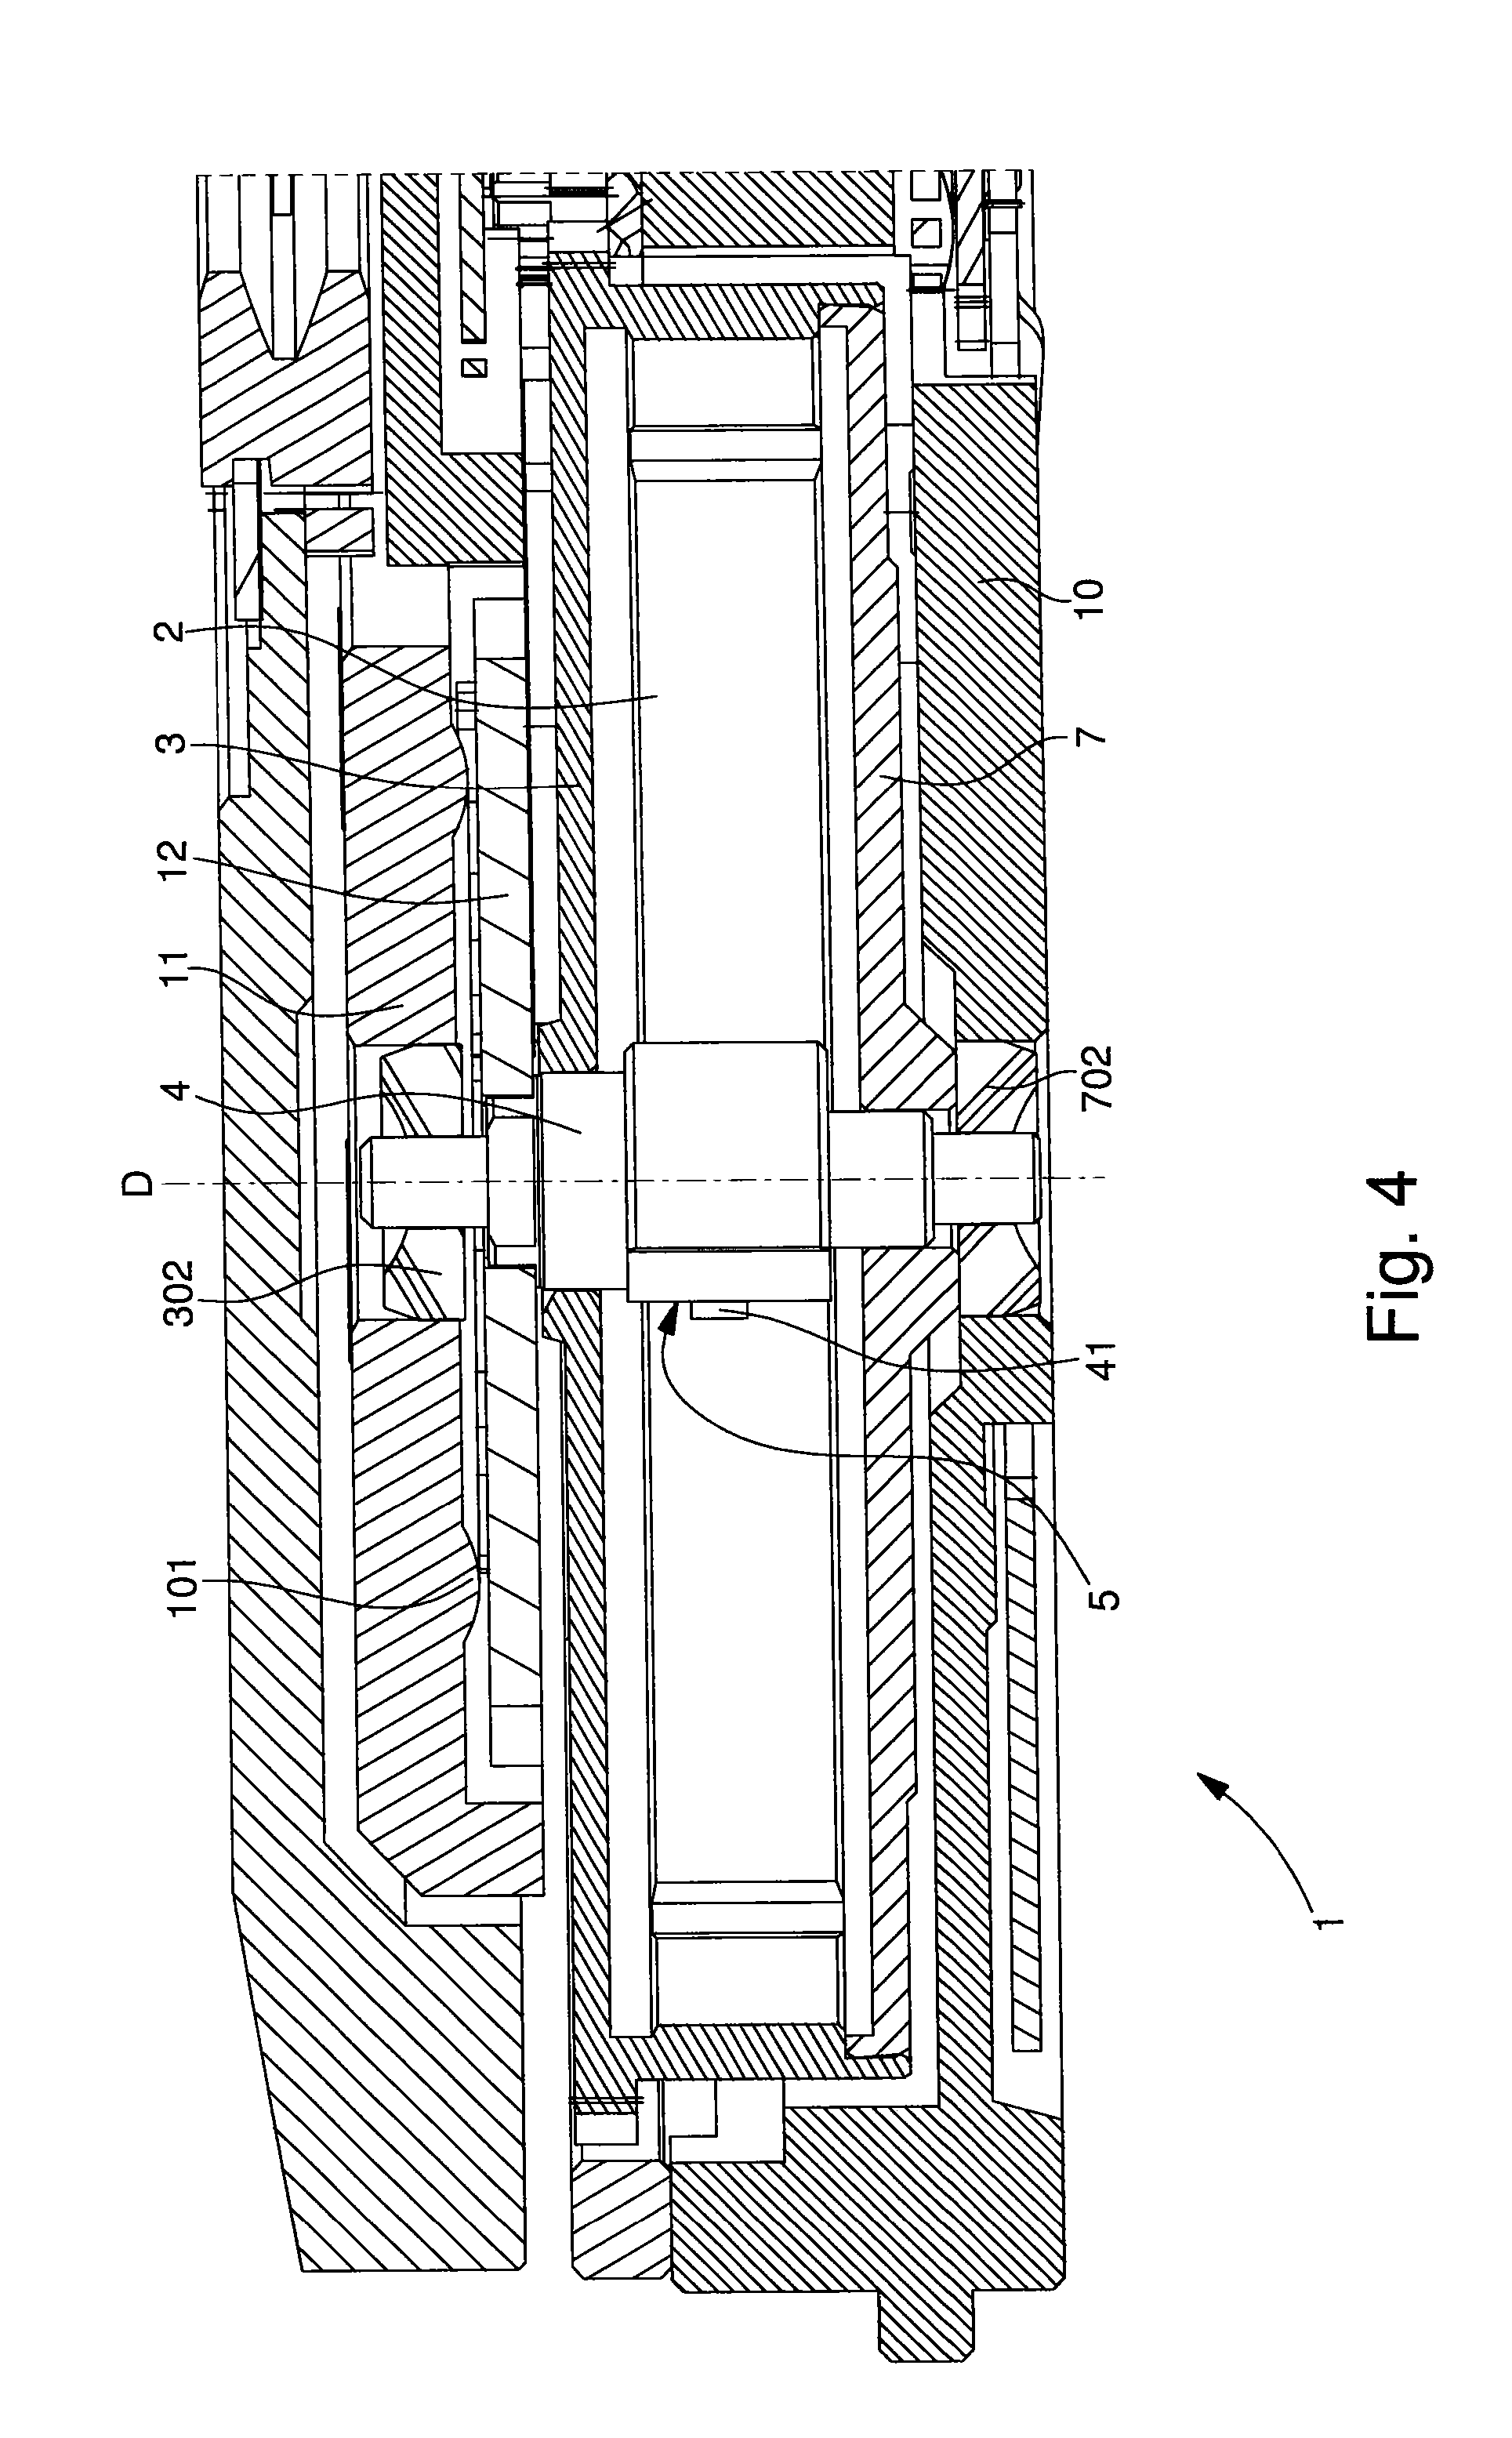 Timepiece movement having a barrel with reduced core diameter